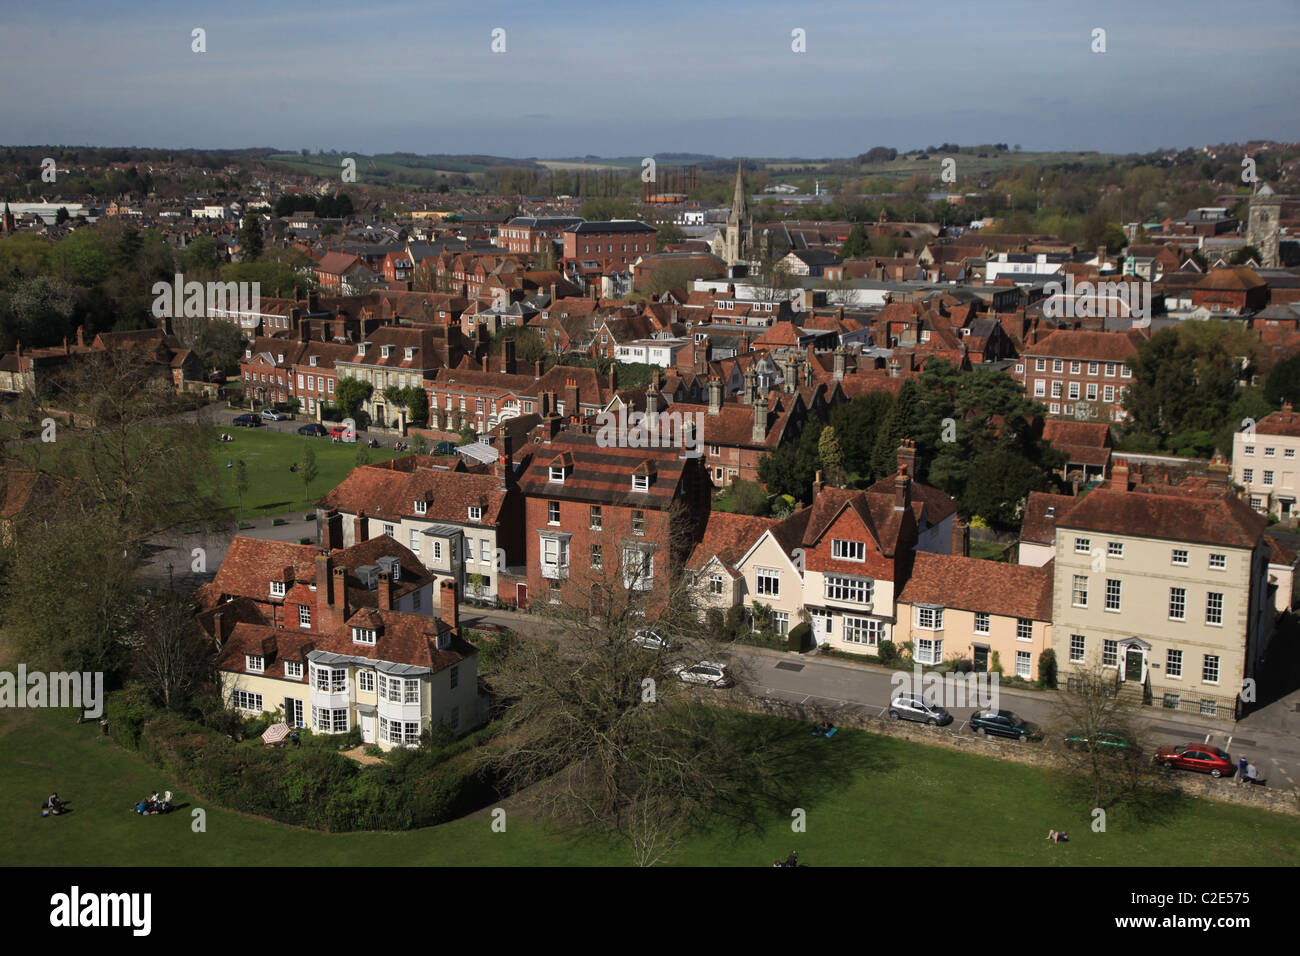 <<enter caption here>> on April 7, 2011 in Salisbury, England. Stock Photo